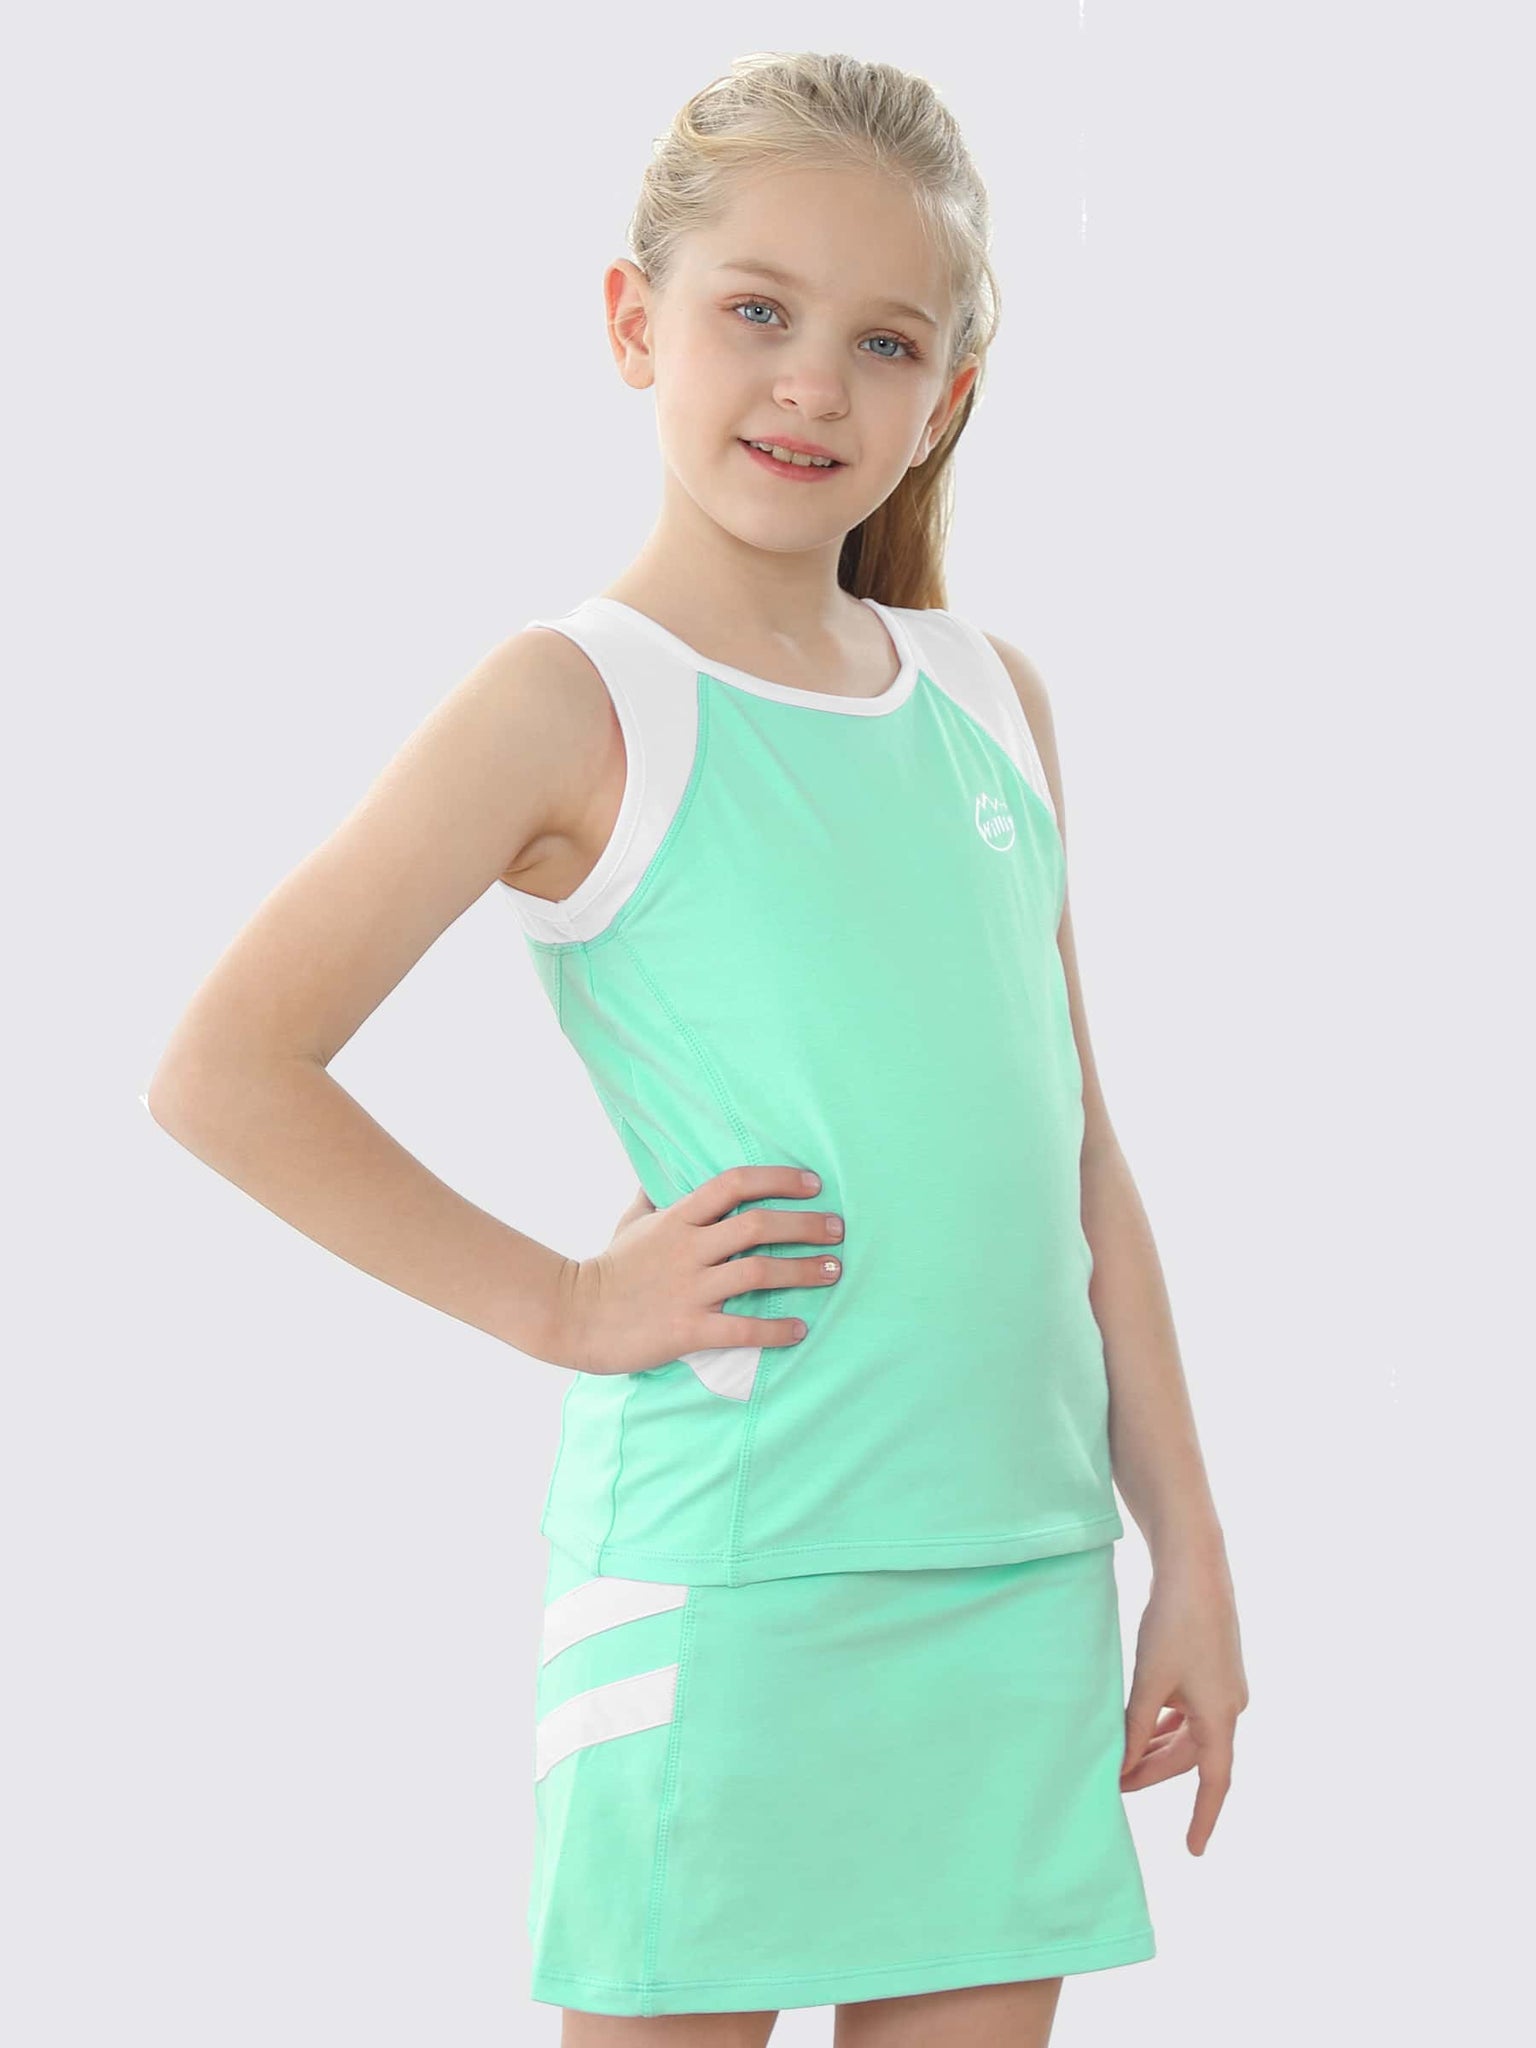 Willit Girls' Tennis Outfit_Green_model2